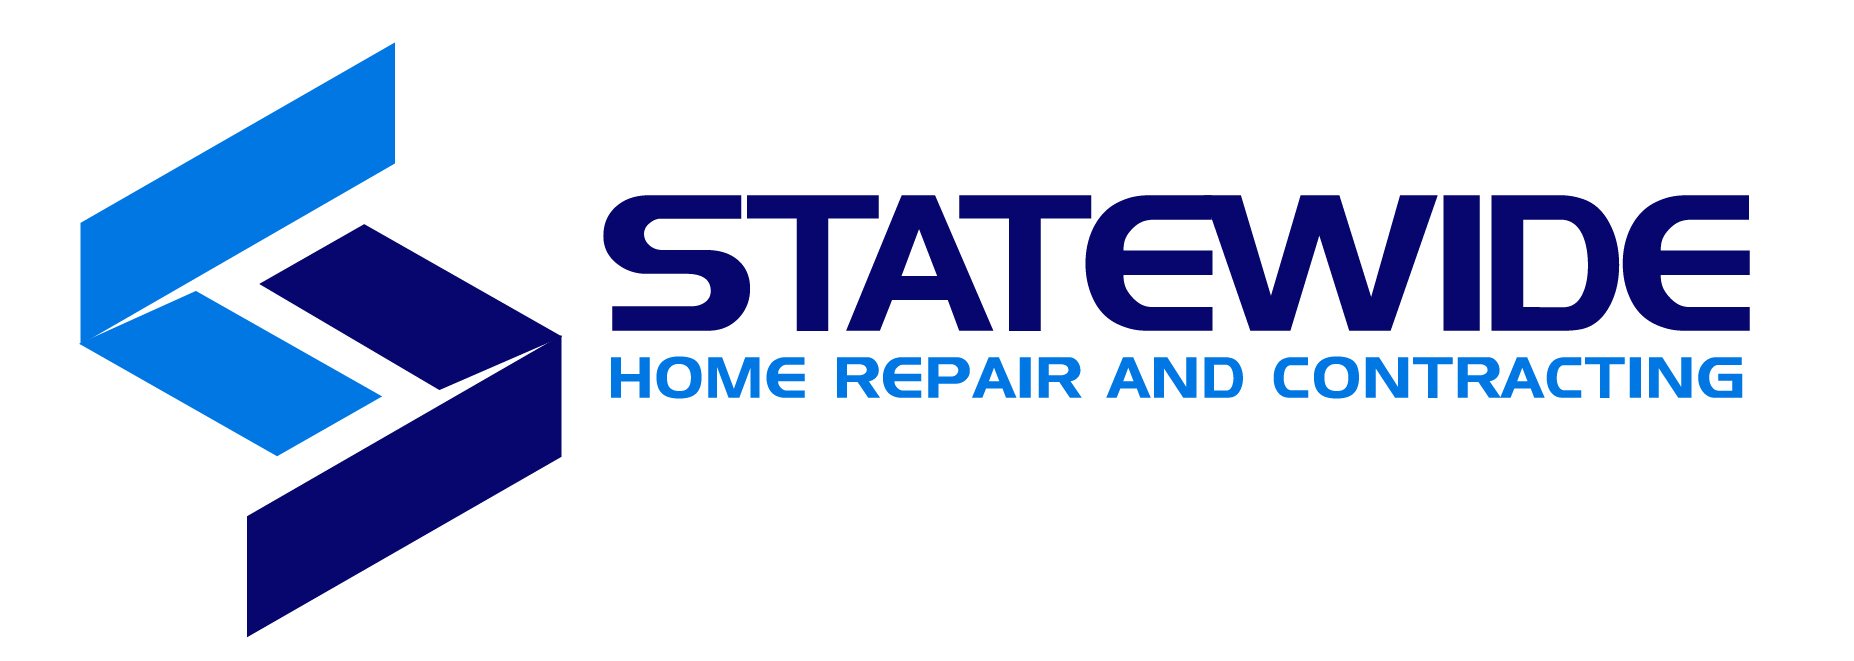 Statewide Home Repair and Contracting, LLC Logo